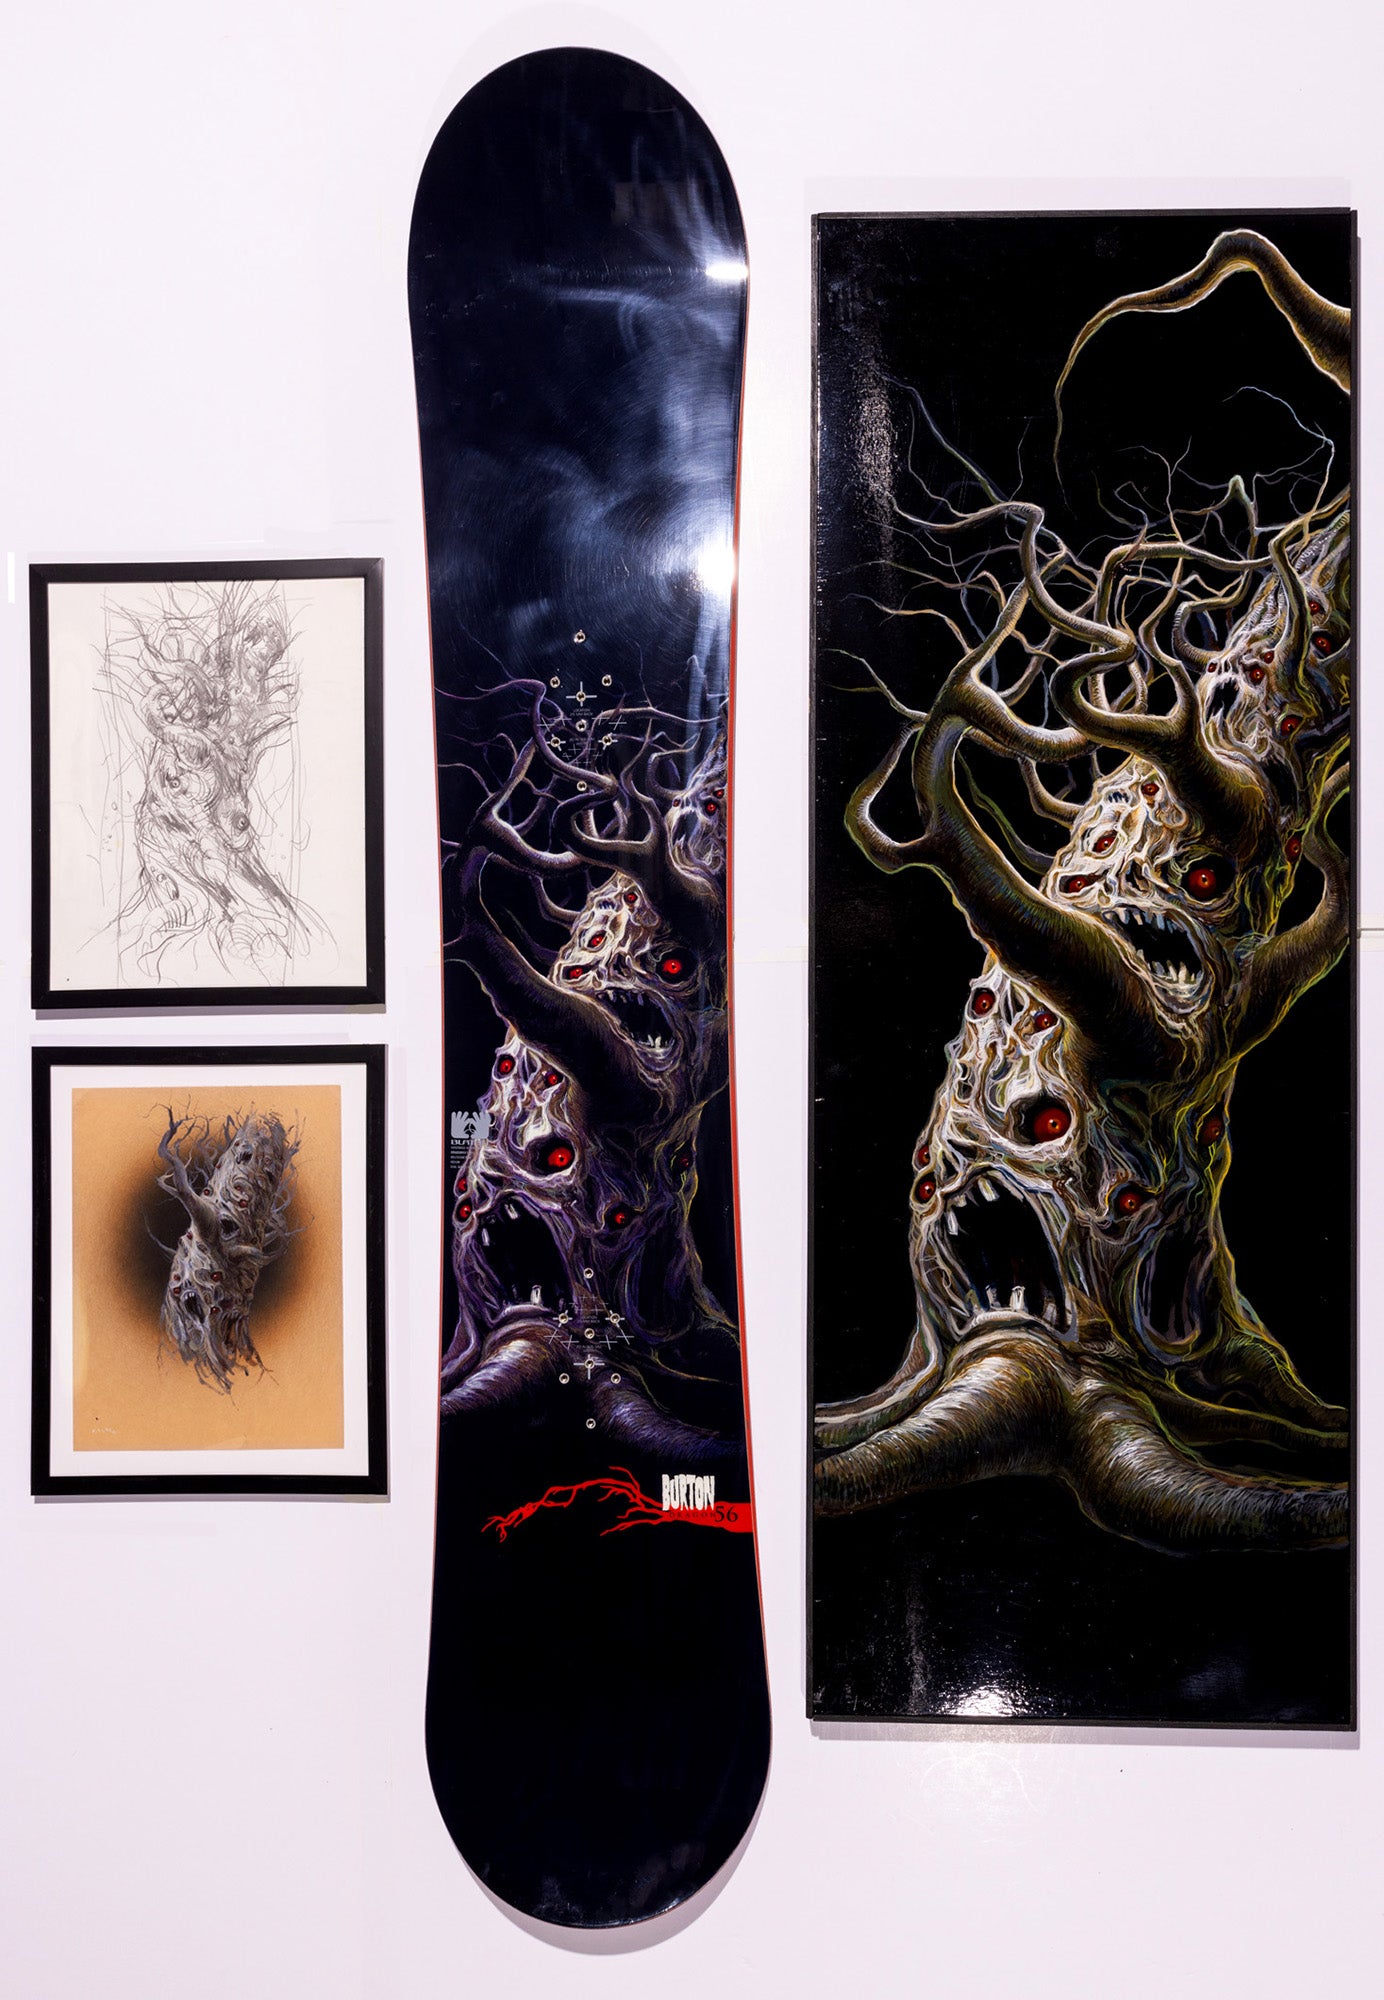 Dragon Series #3, "Tree" ca 2000 with acrylic panel signed on bottom, 2-sketches and new unridden snowboard